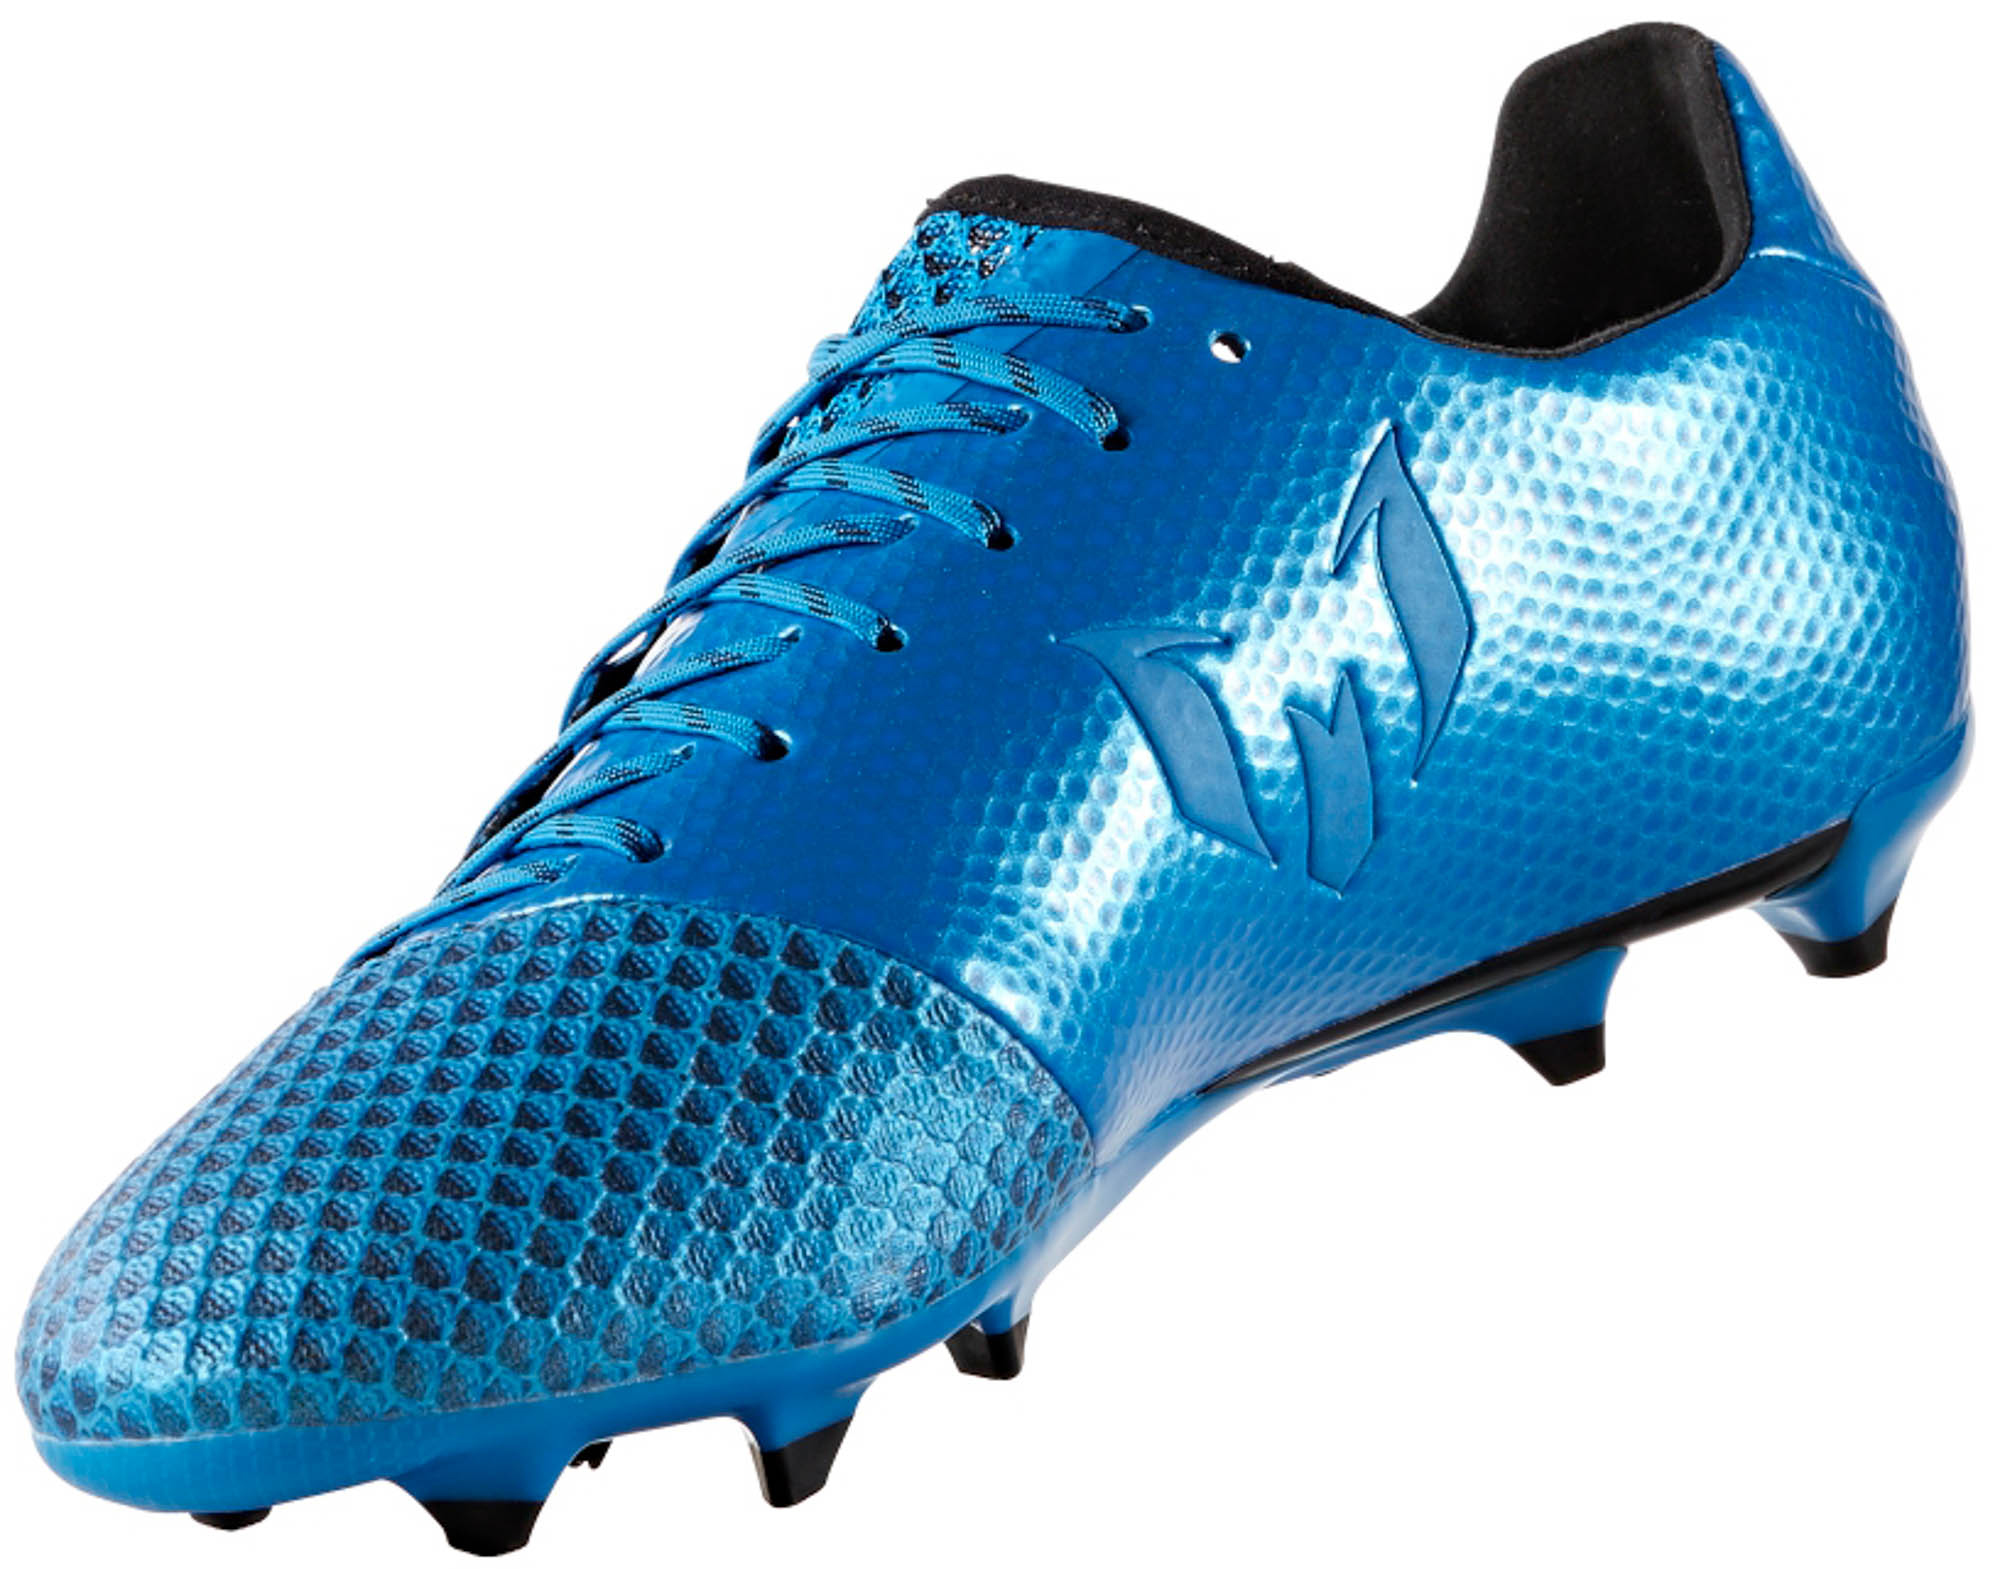 adidas Messi 16.2 FG Cleats - Blue 